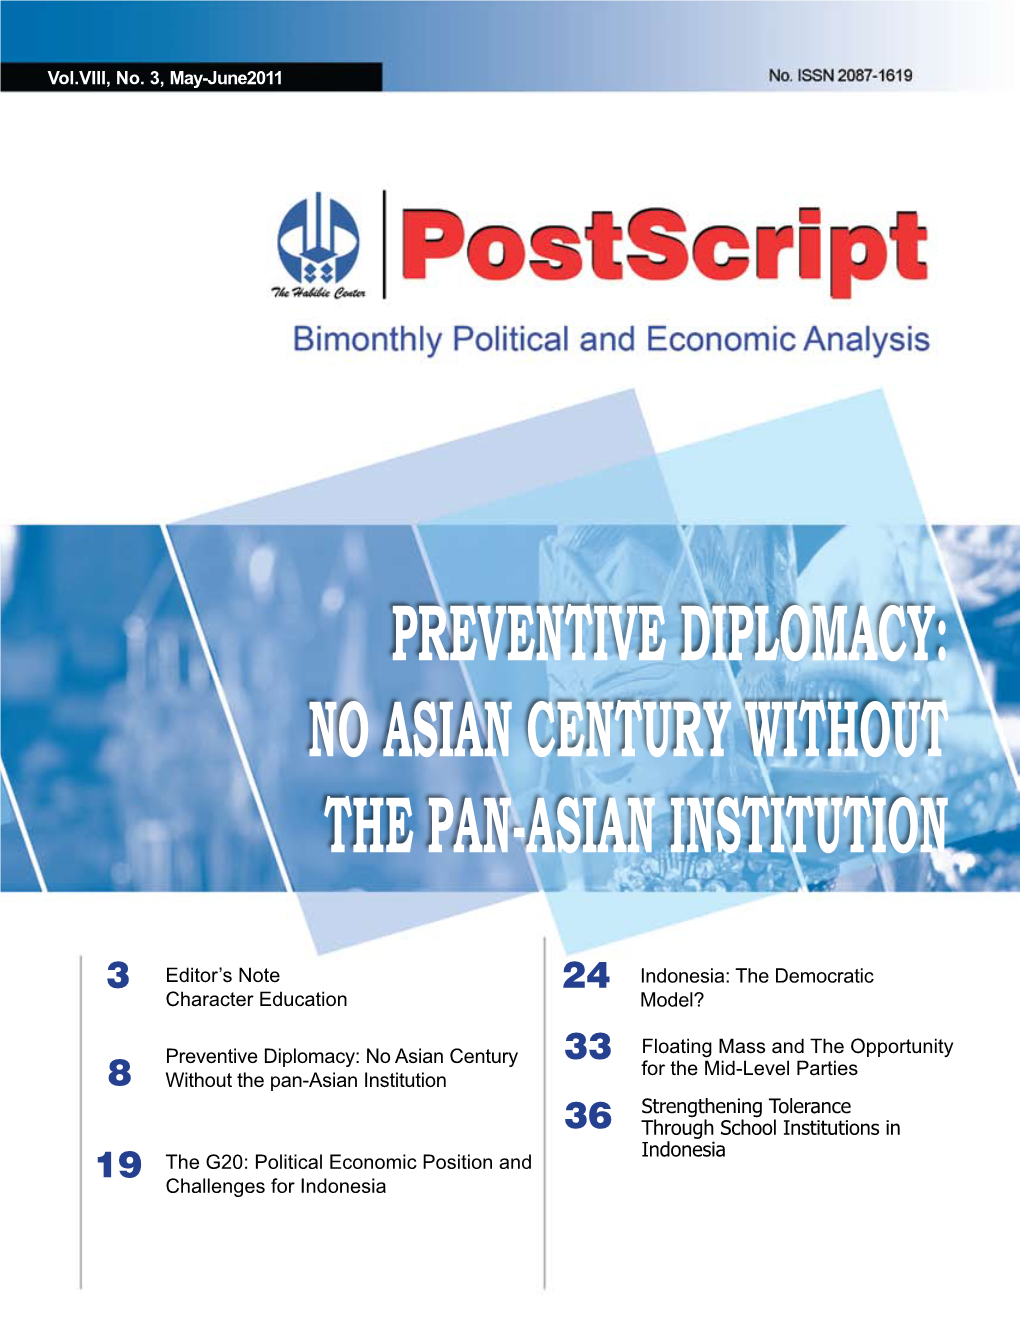 Preventive Diplomacy: No Asian Century Without the Pan-Asian Institution